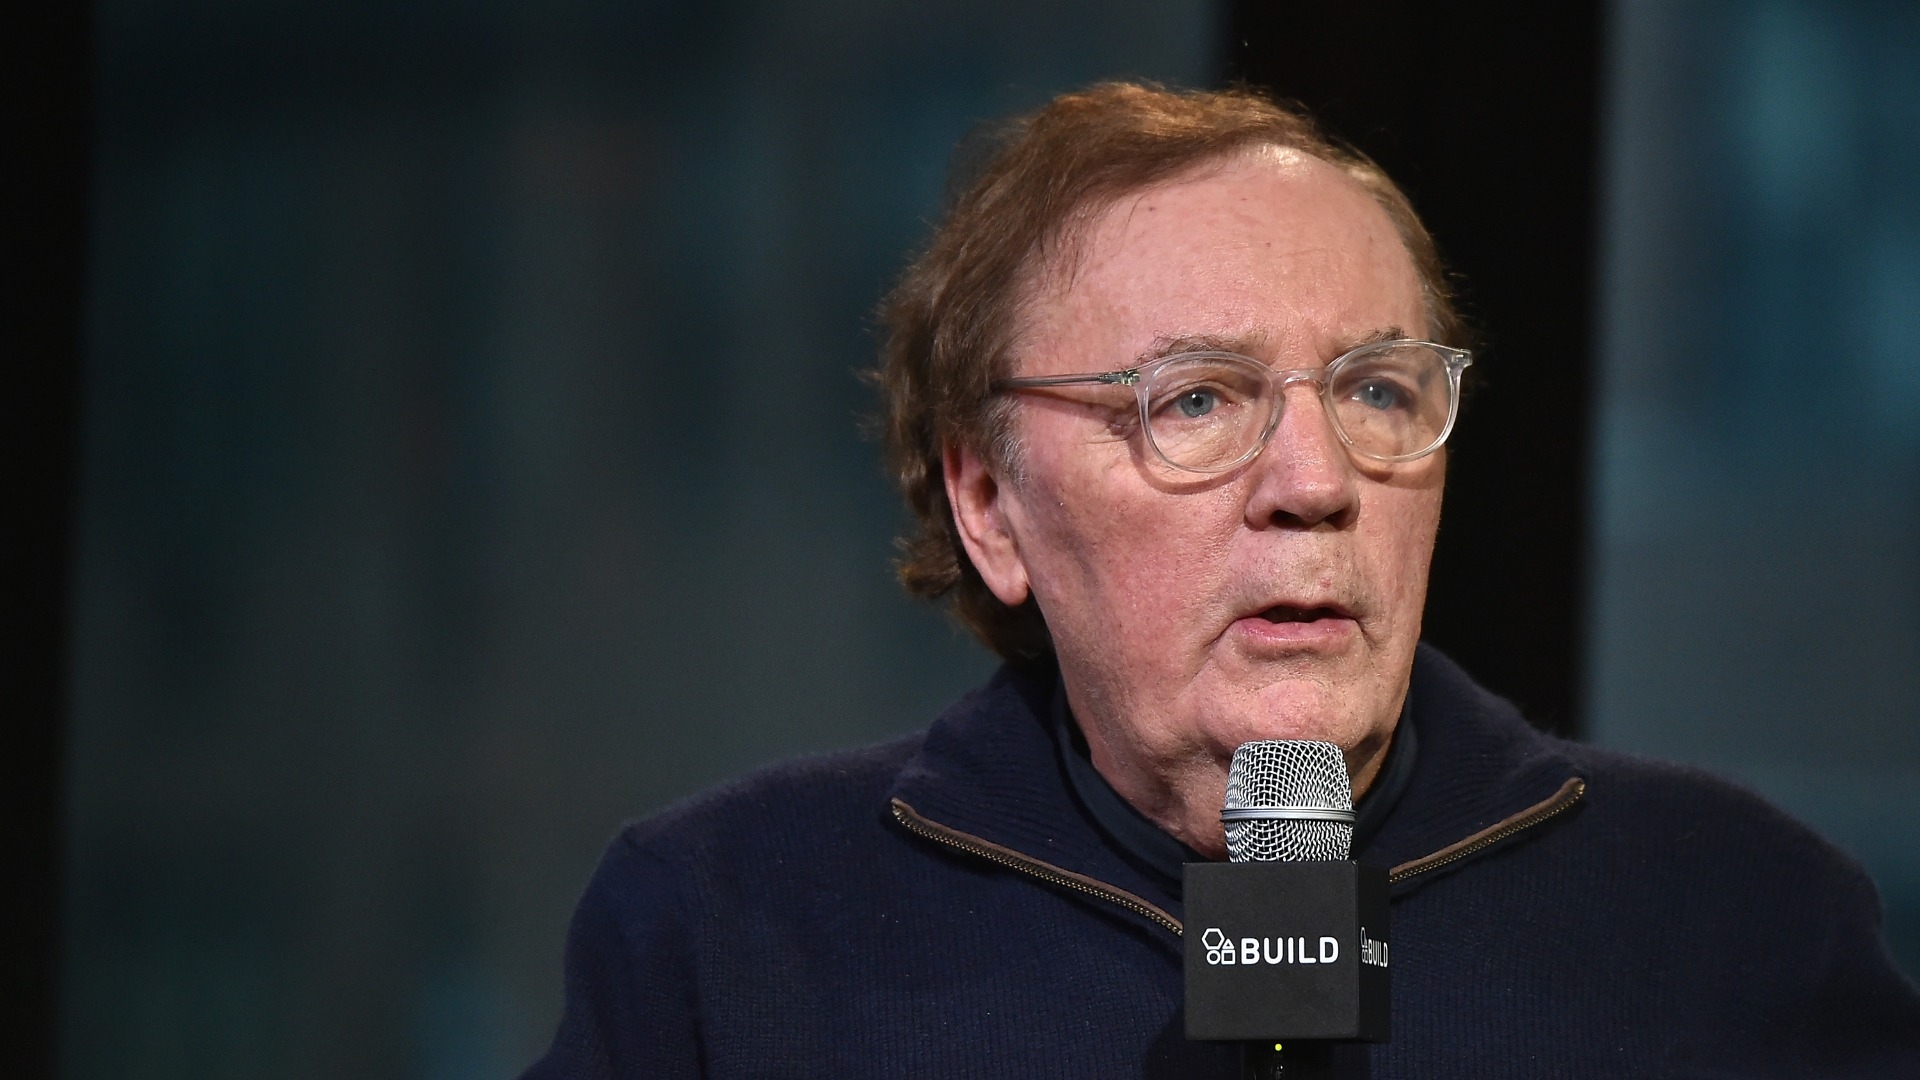 James Patterson apologizes after backlash over comments about racism against older white men